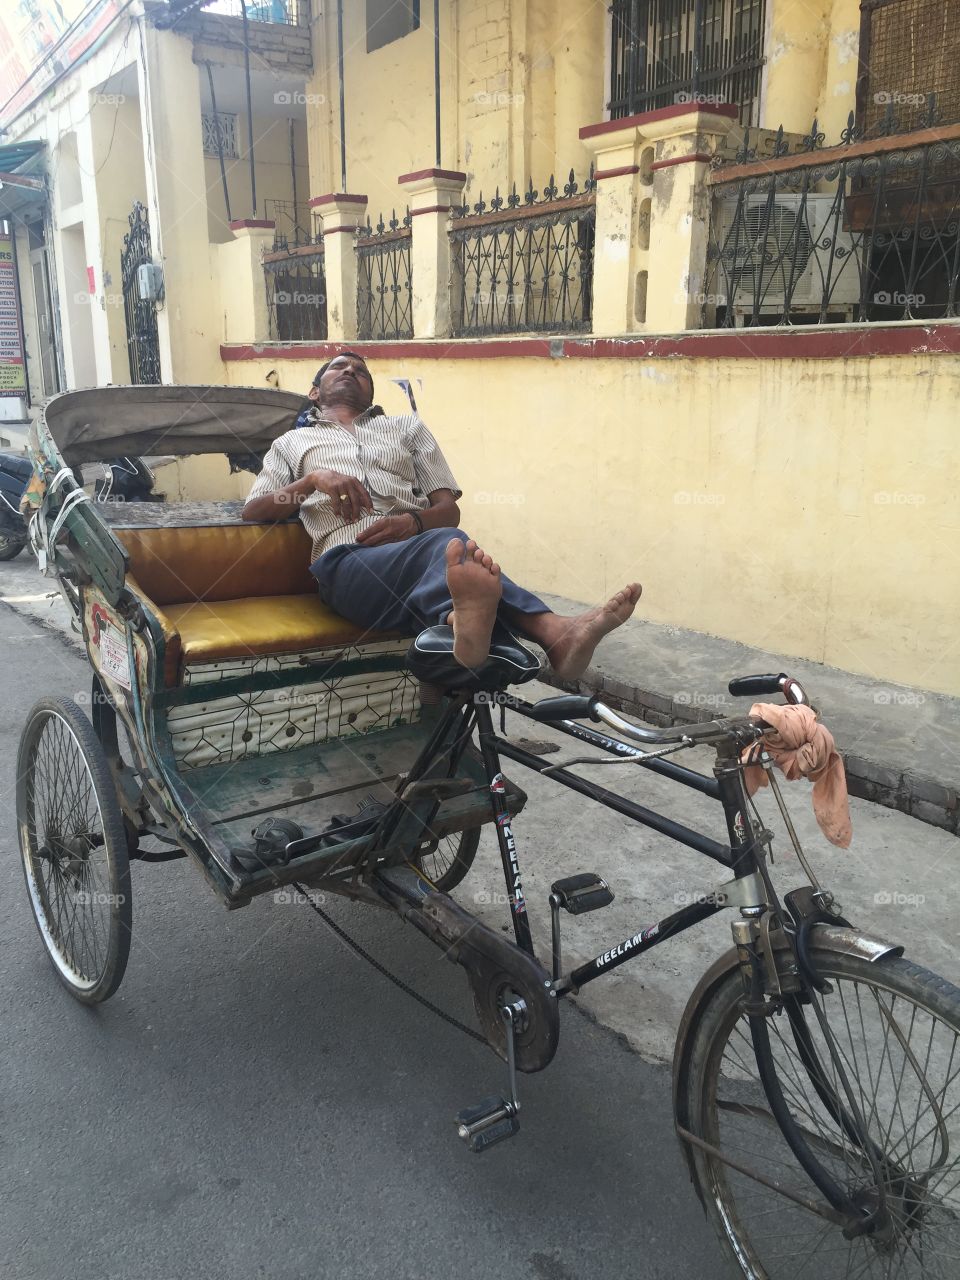 Just a quick nap during work in India.